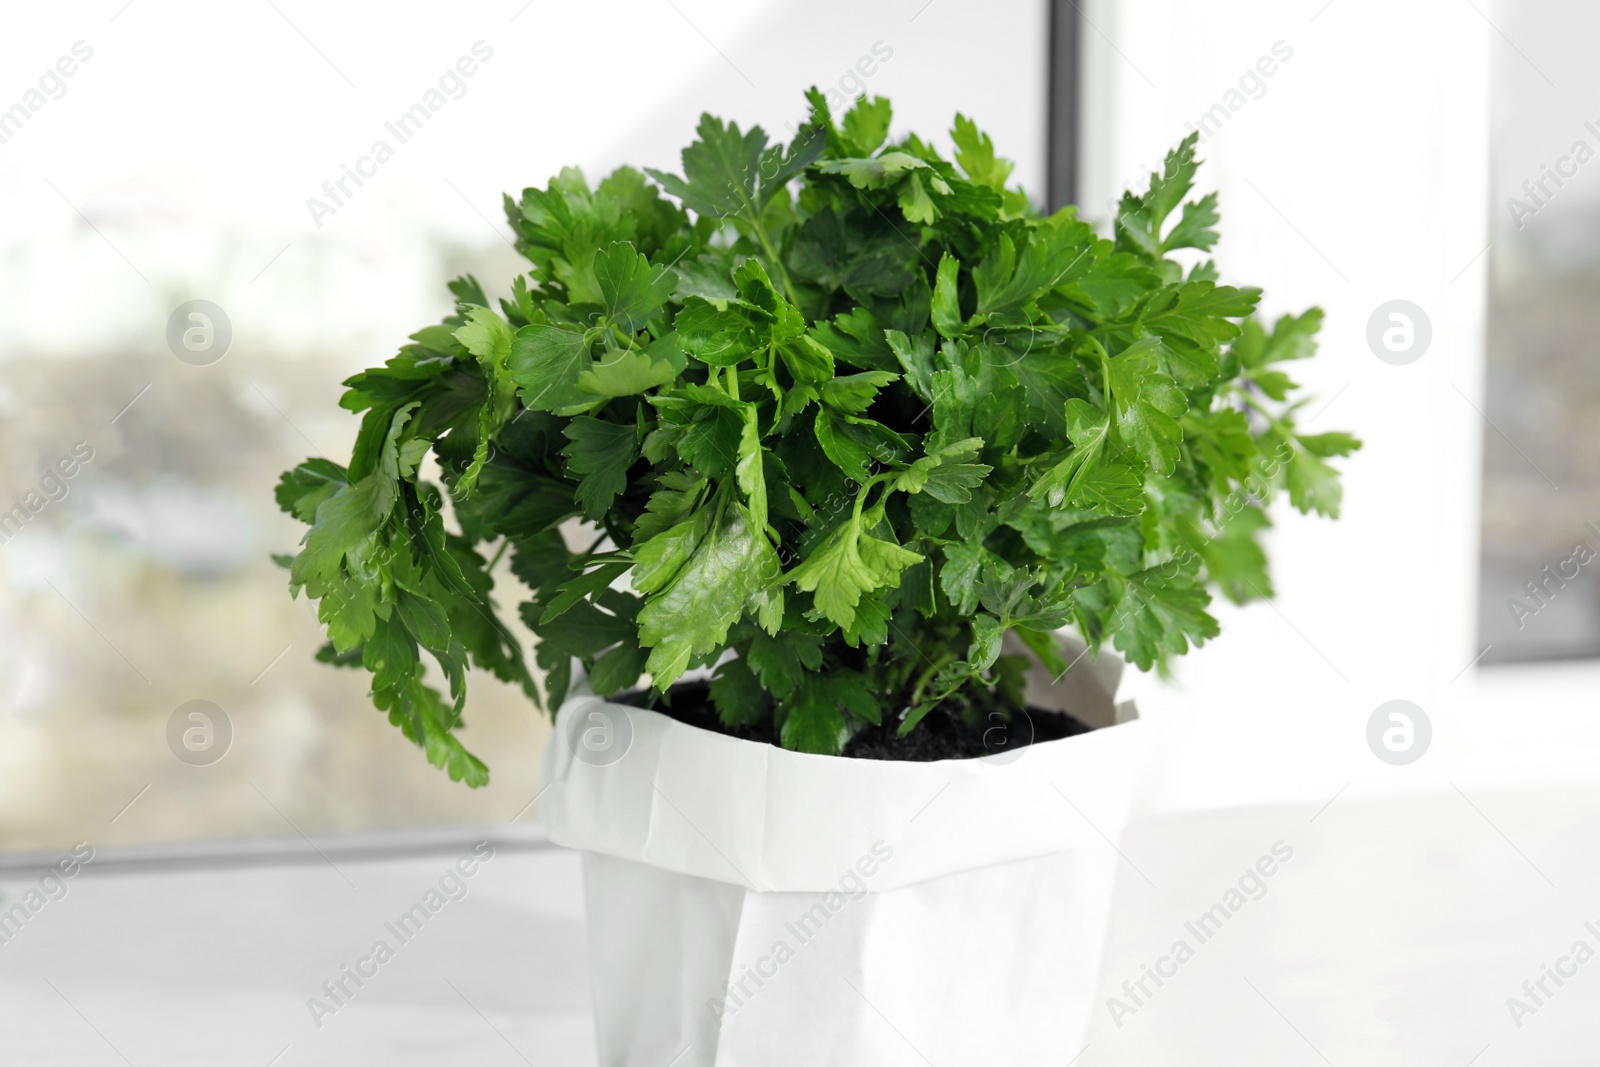 Photo of Pot with fresh green parsley on window sill